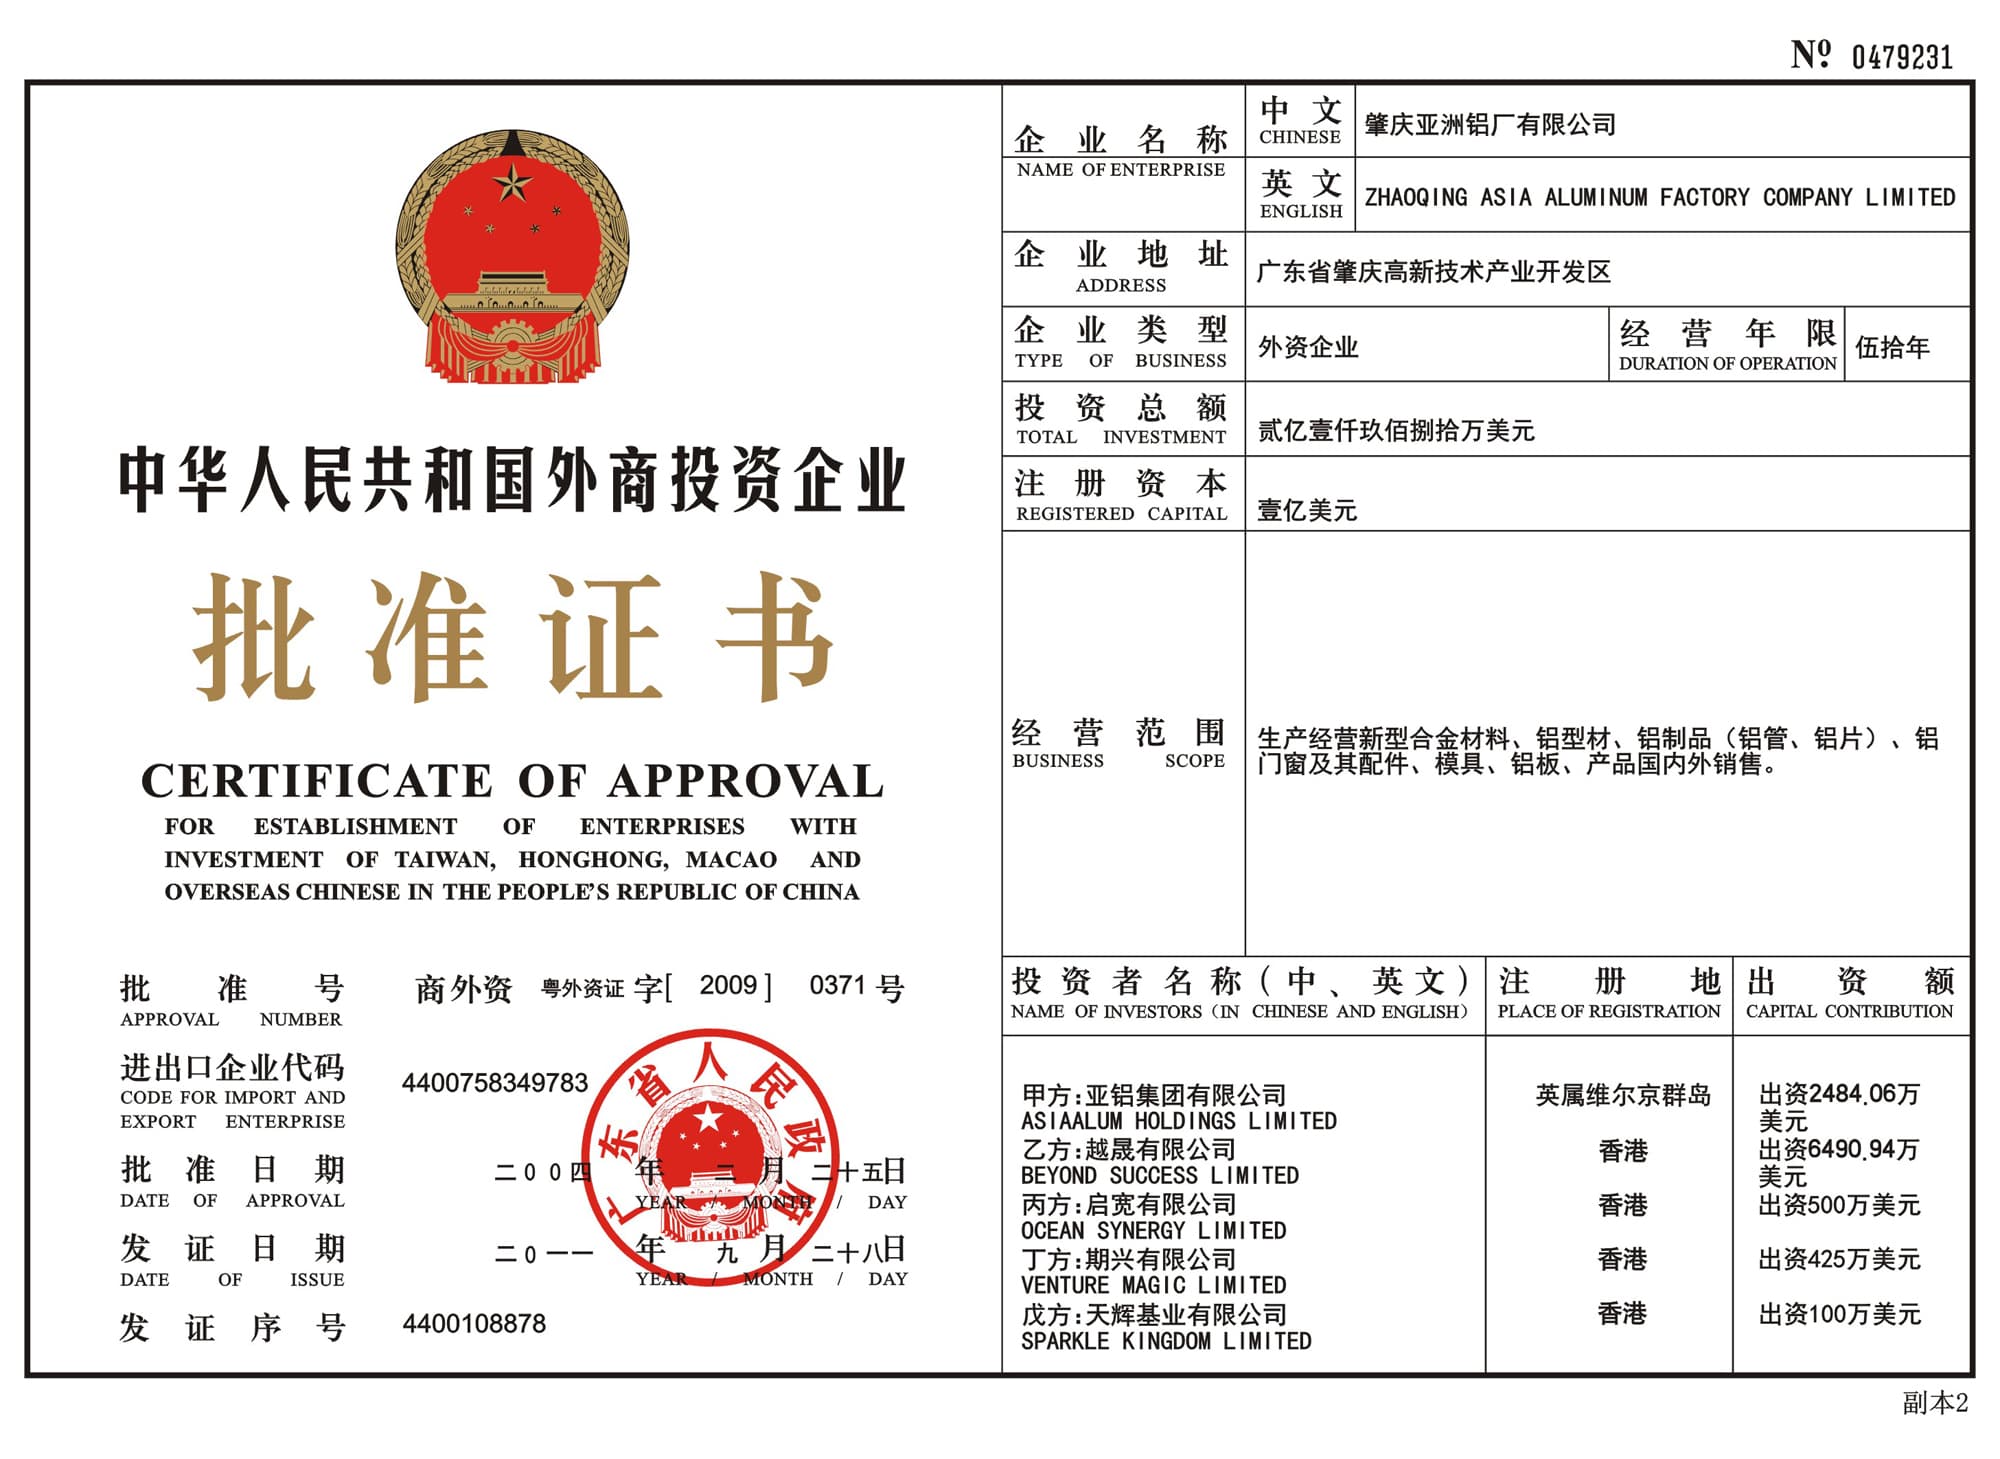 Certificate of Approval for Enterprise with Foreign Investment